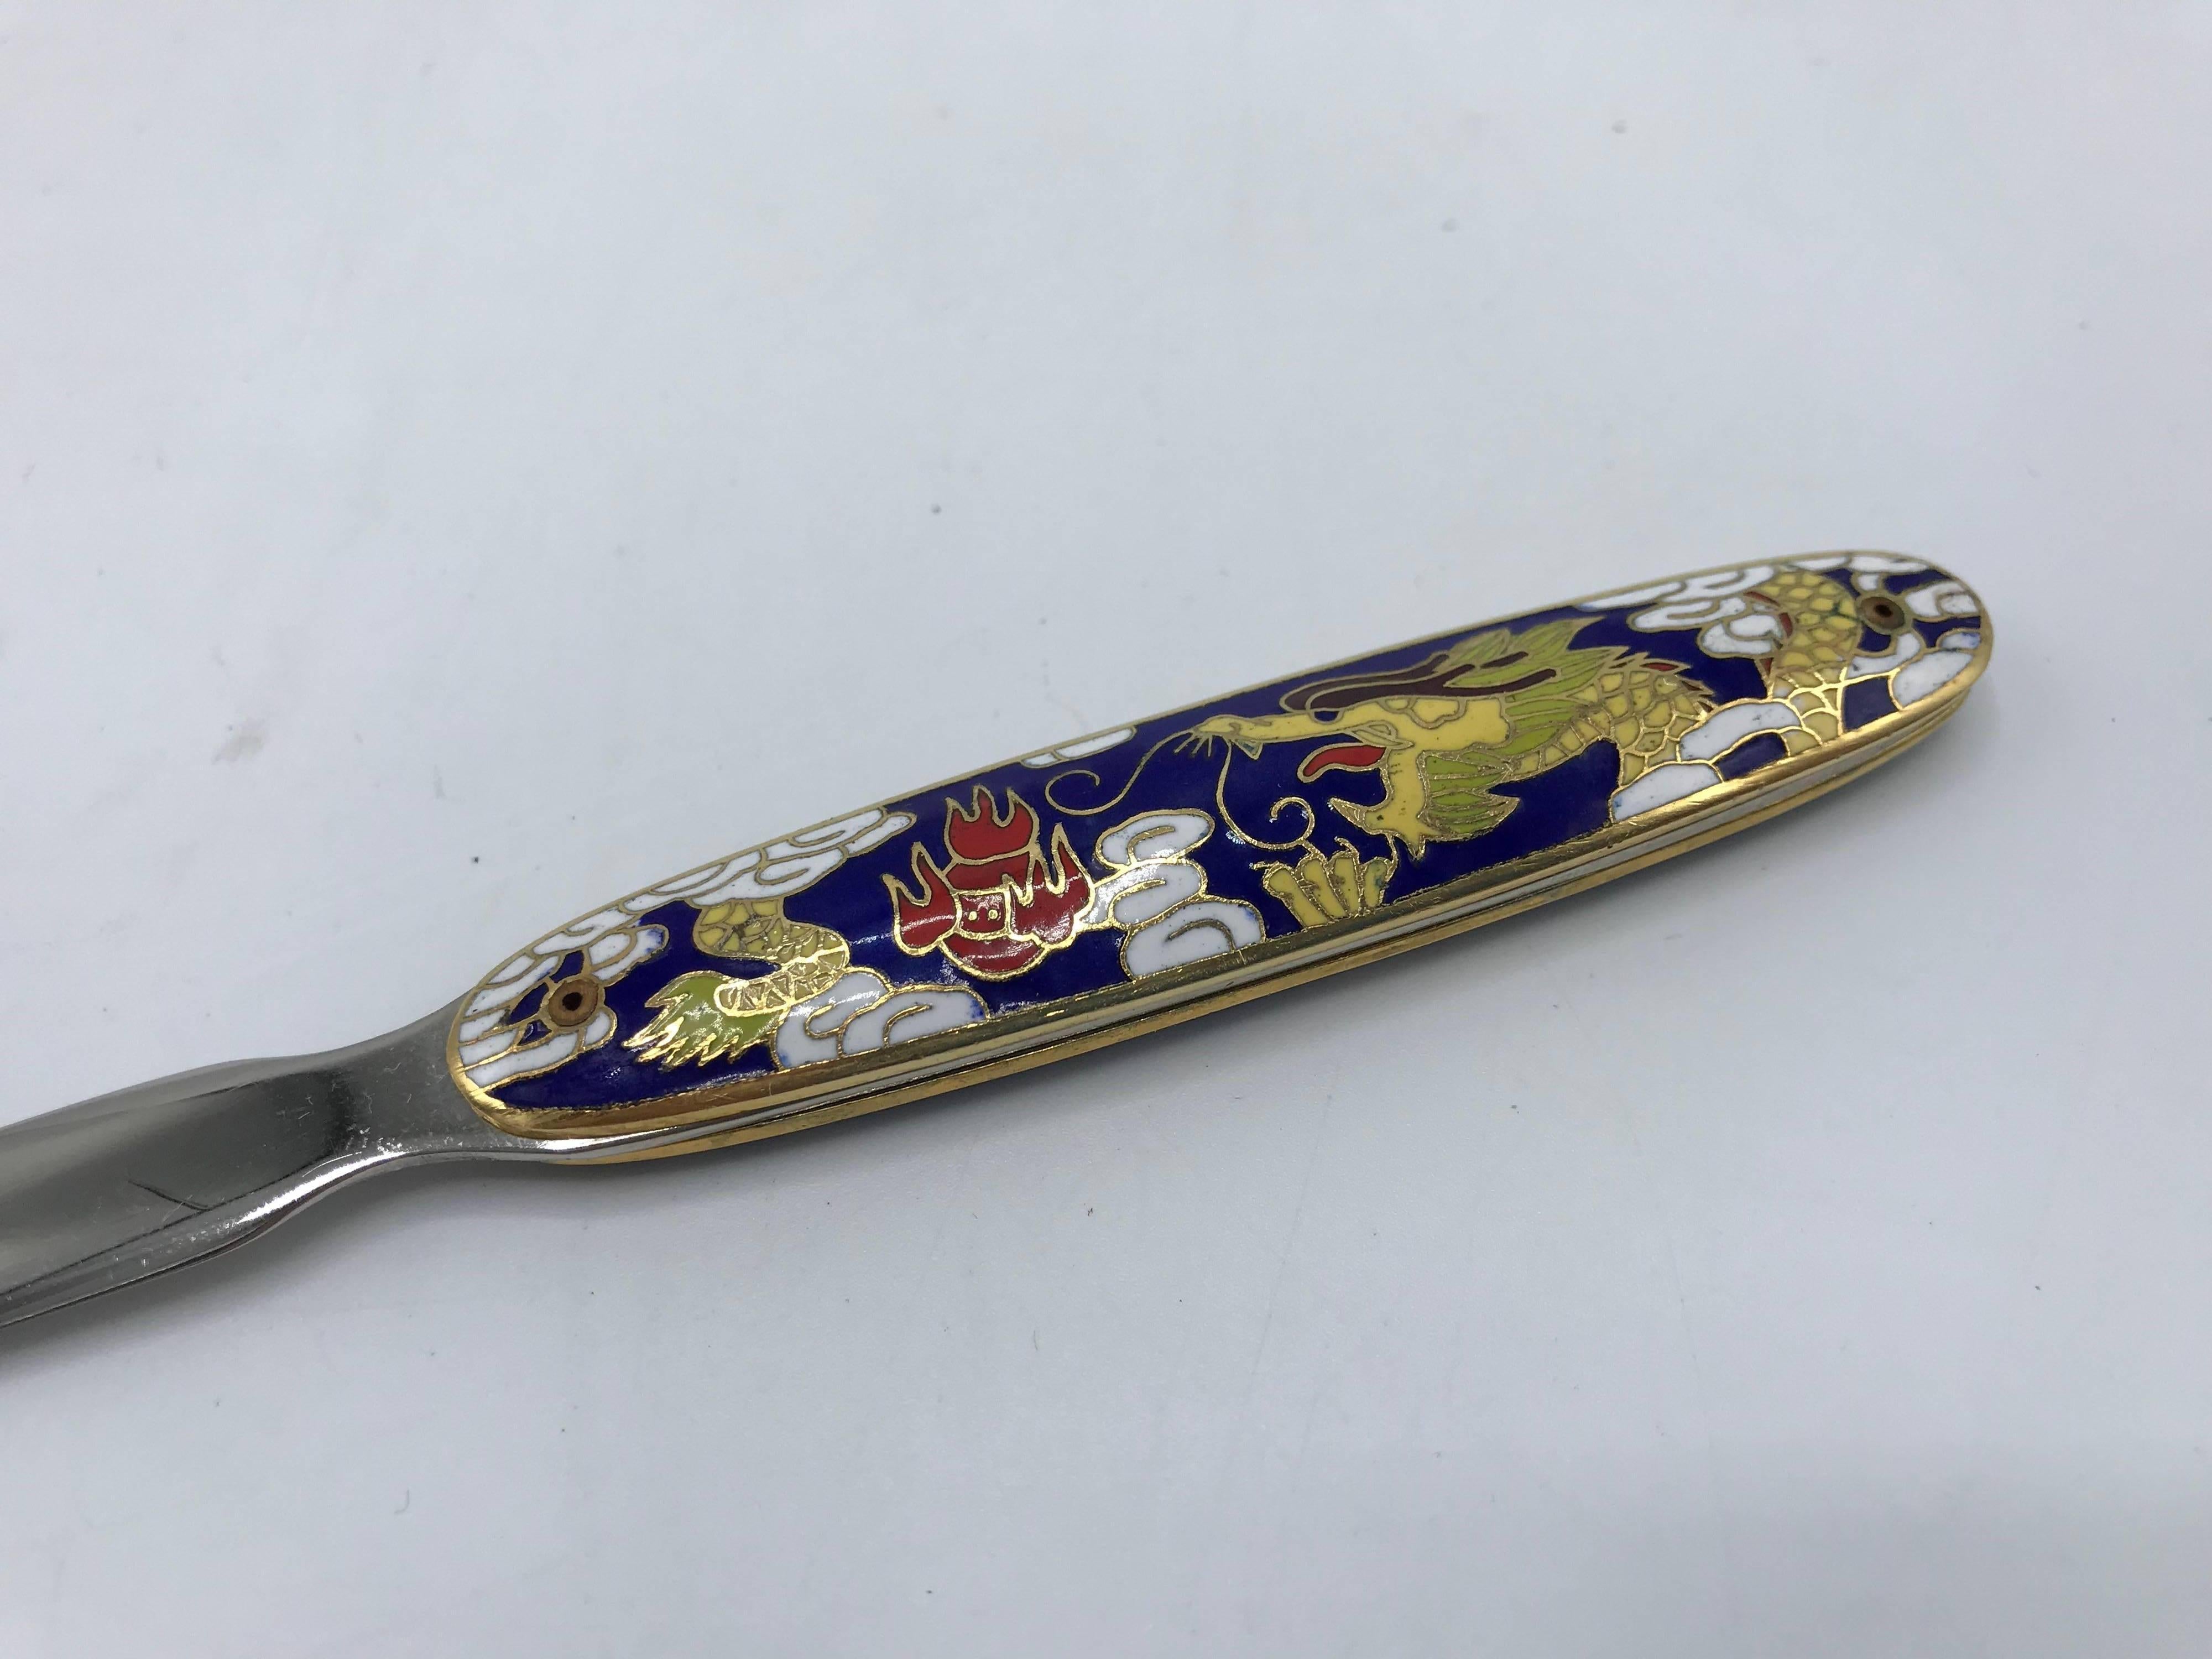 Offered is a gorgeous, never used, 1970s blue cloisonné letter opener with a dragon motif. Marked ‘Peking Notel China’ on backside.